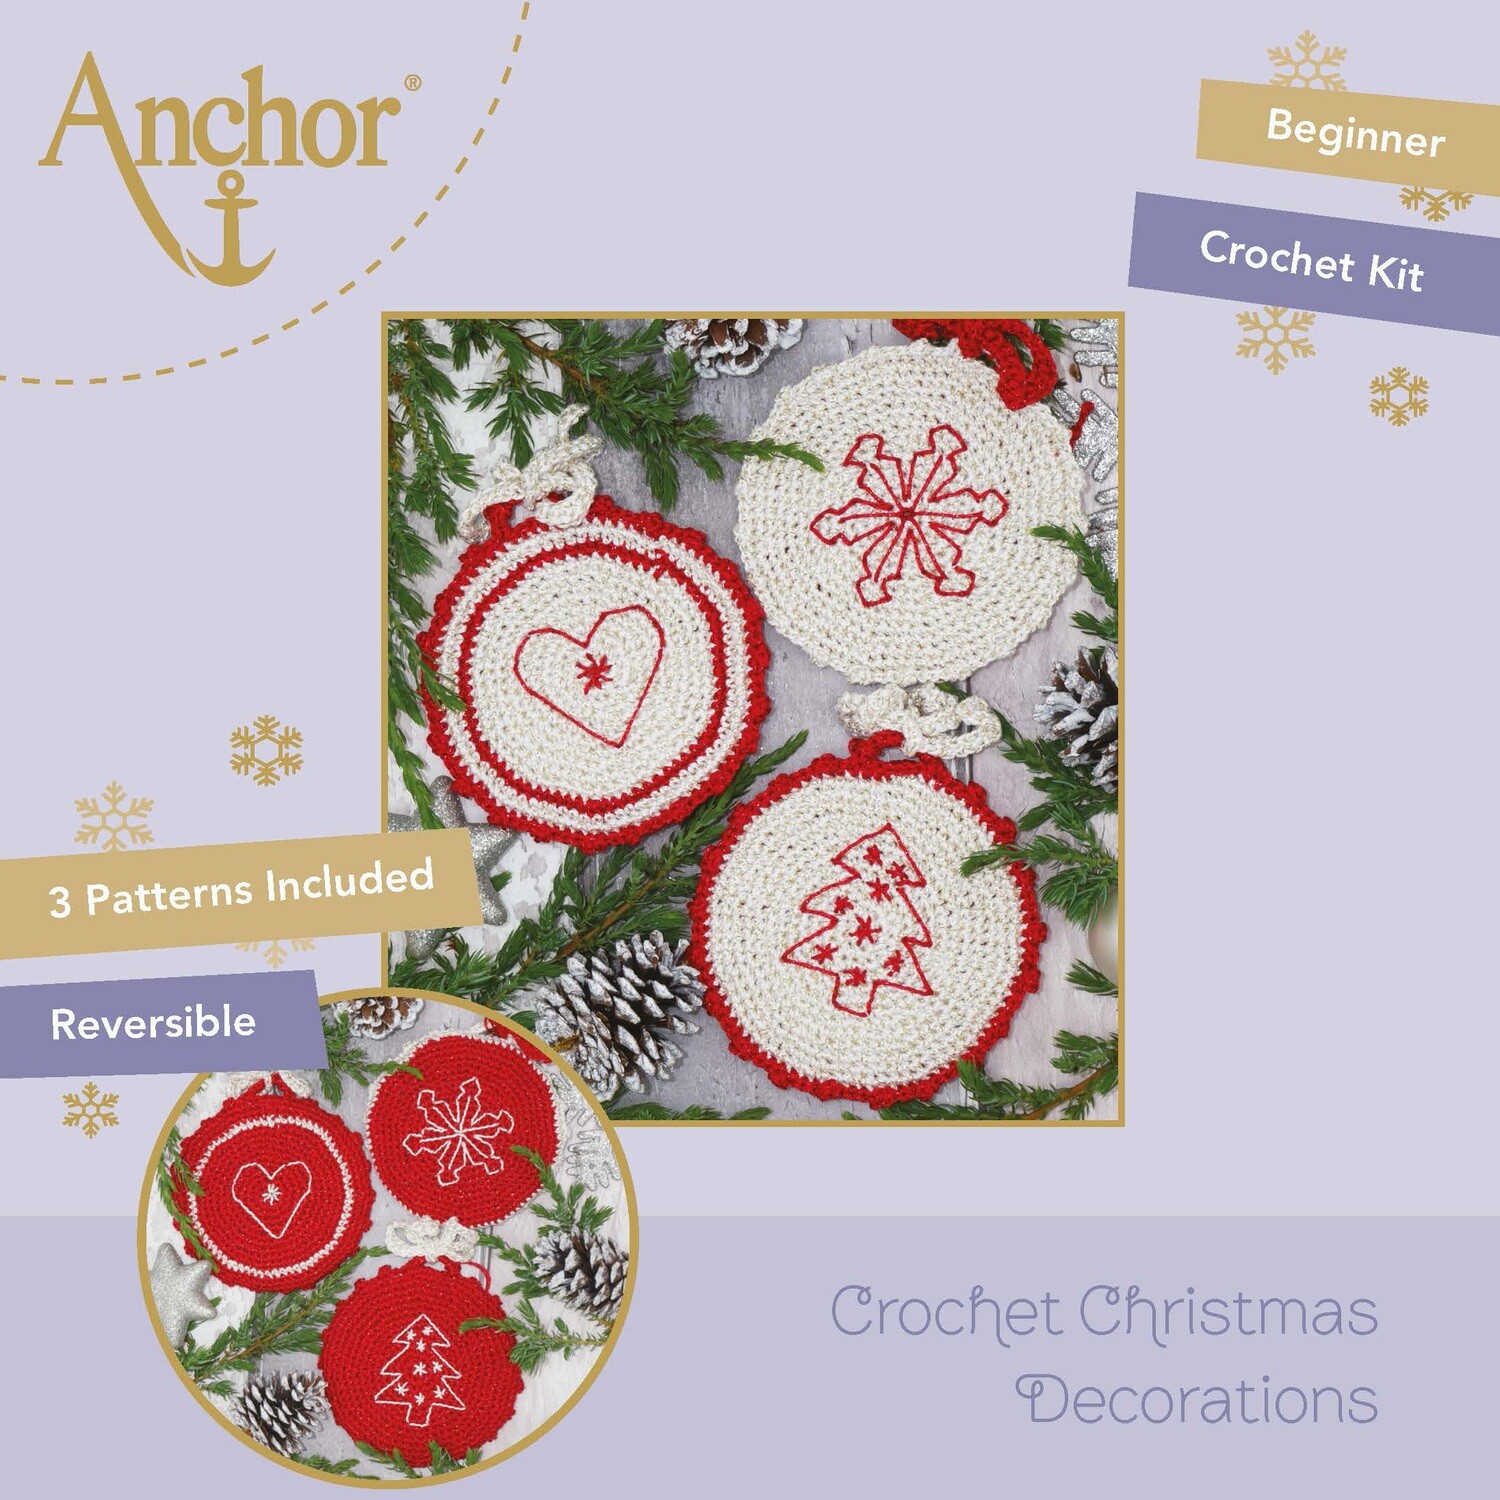 Crochet Christmas Decorations - Christmas Crocheted Circles (Red Set)